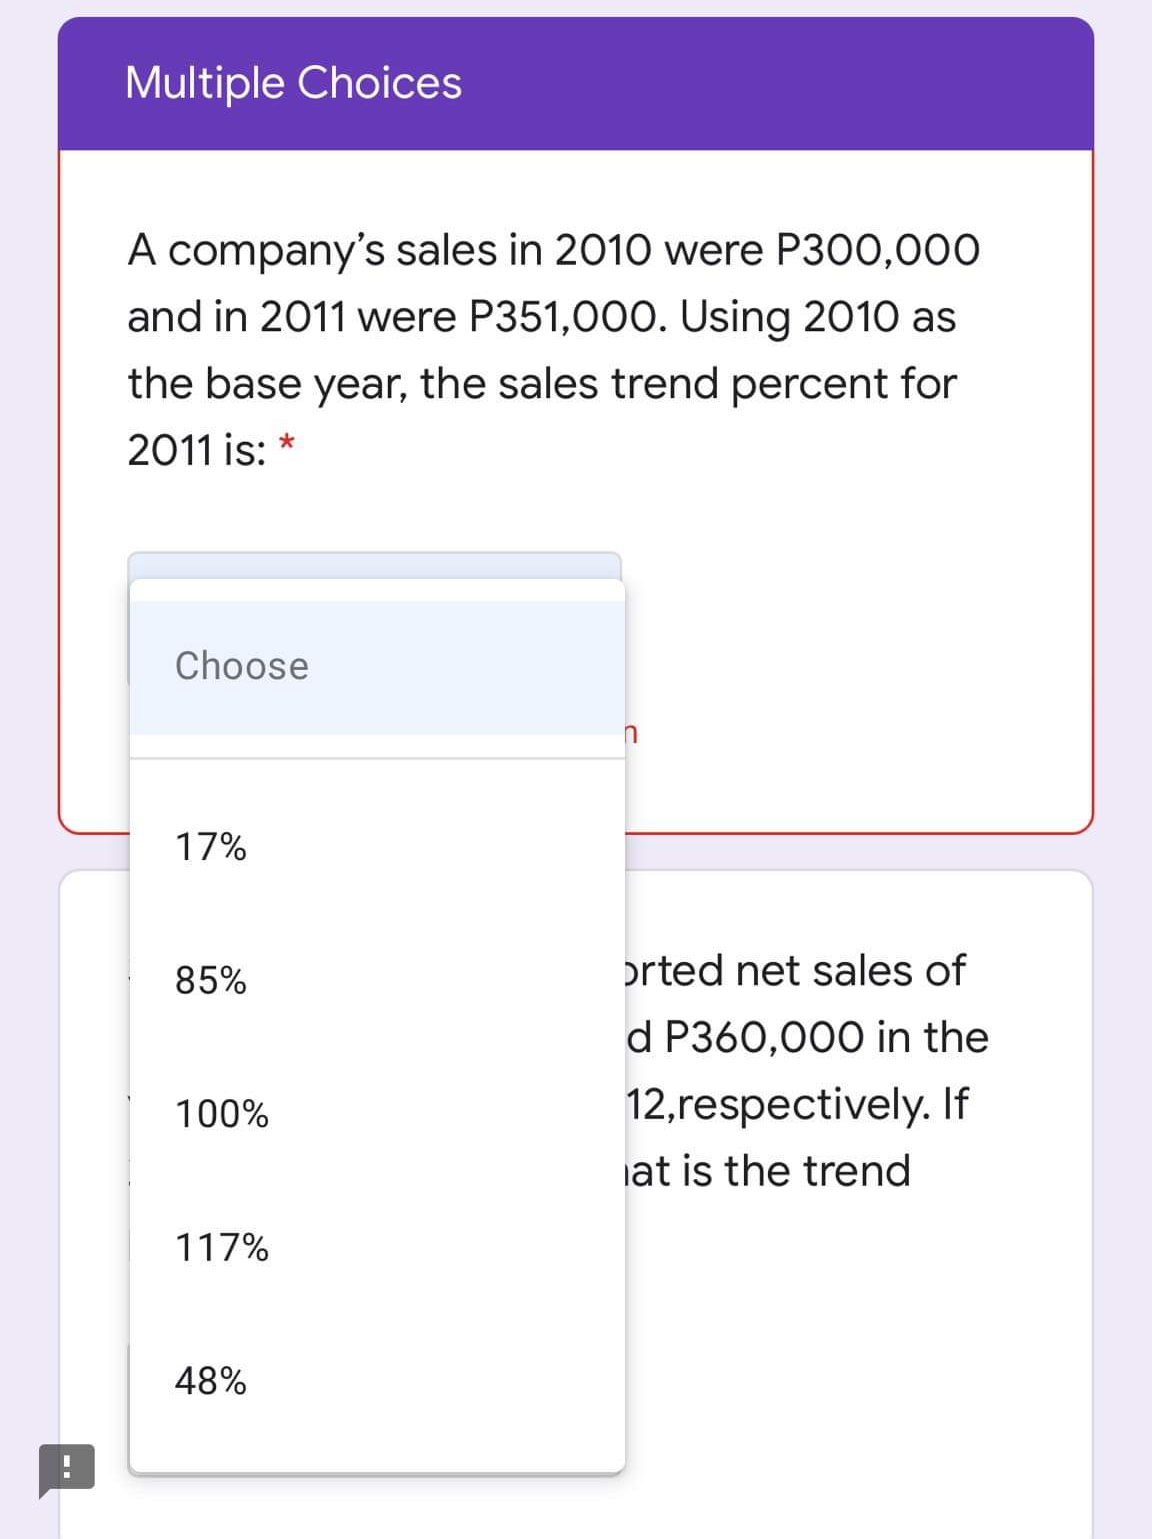 Multiple Choices
A company's sales in 2010 were P300,000
and in 2011 were P351,000. Using 2010 as
the base year, the sales trend percent for
2011 is: *
Choose
17%
85%
orted net sales of
d P360,000 in the
100%
12,respectively. If
iat is the trend
117%
48%
